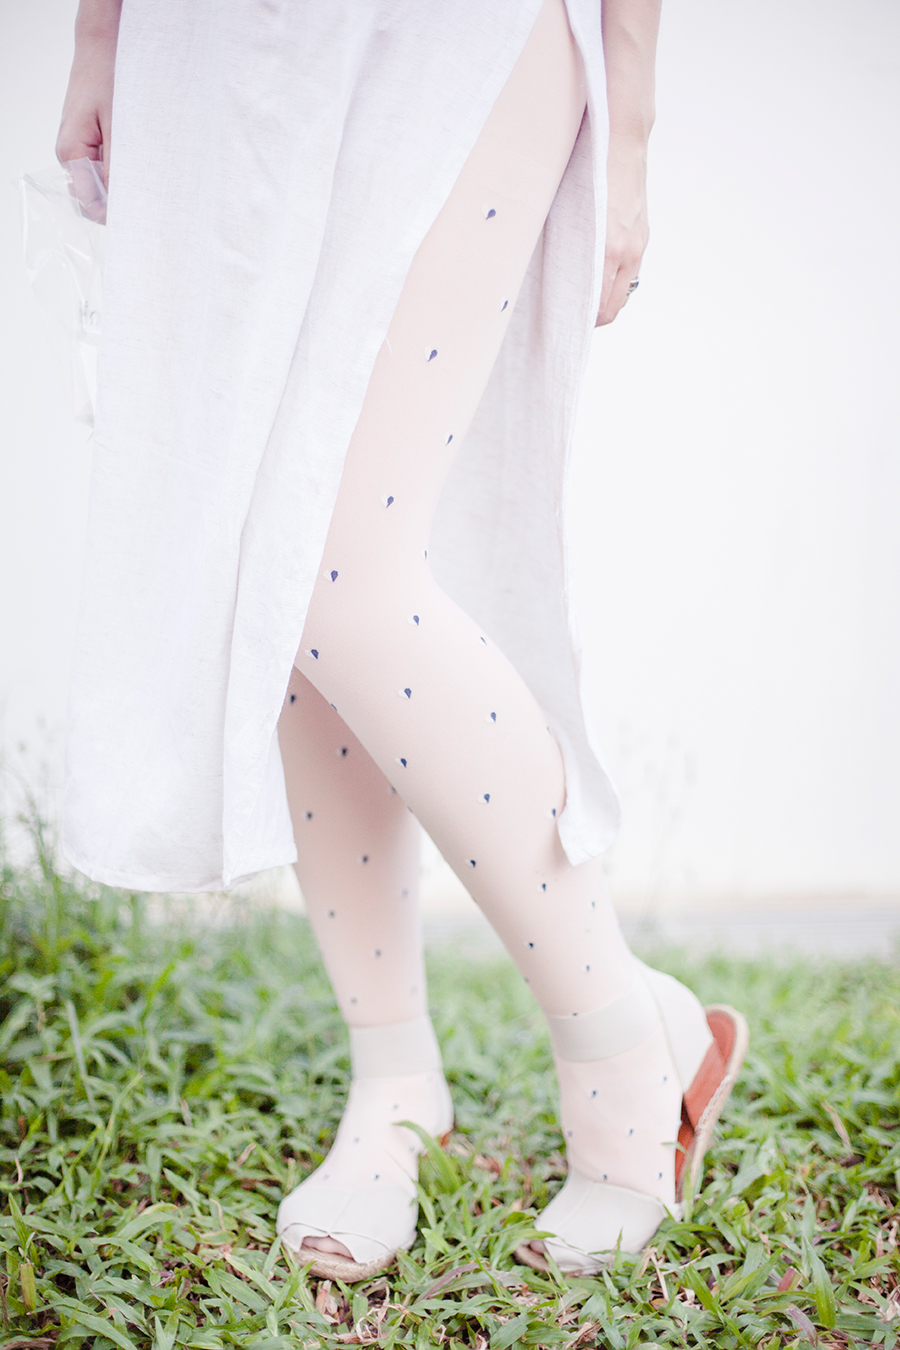 heart-patterned tights, Aldo wrap sandals.